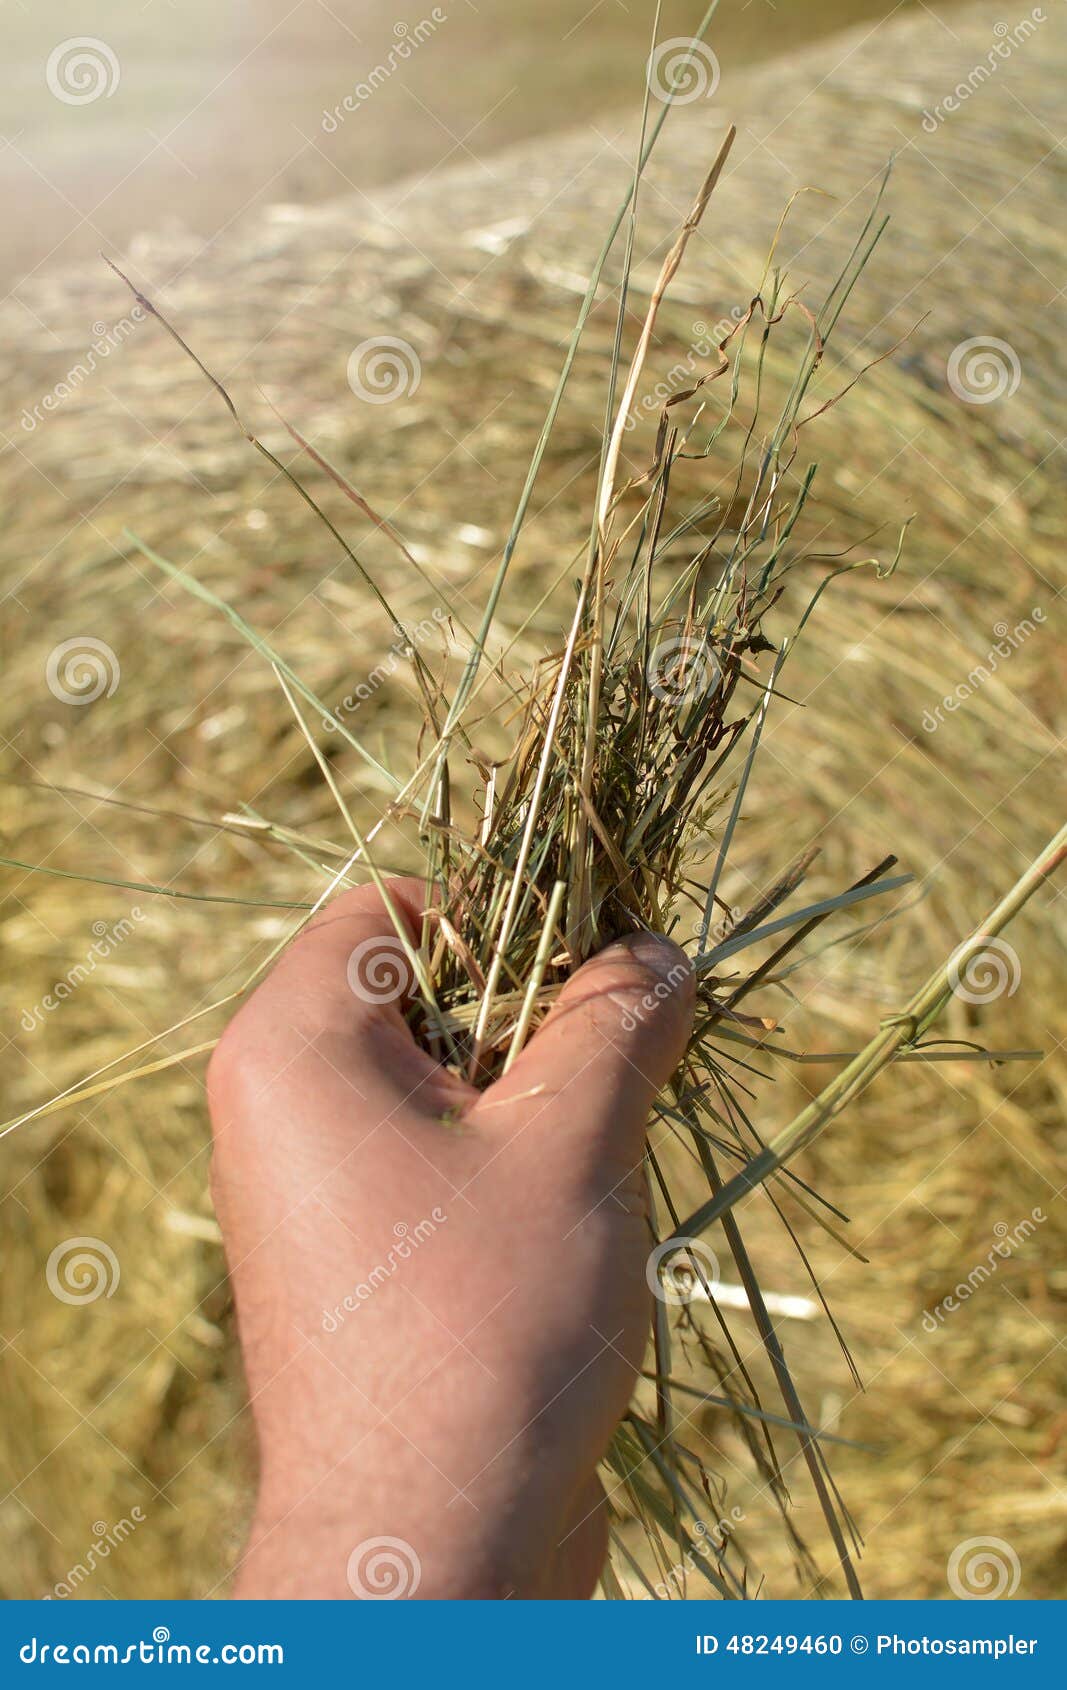 [Image: holding-hay-infront-straw-bale-can-repre...249460.jpg]